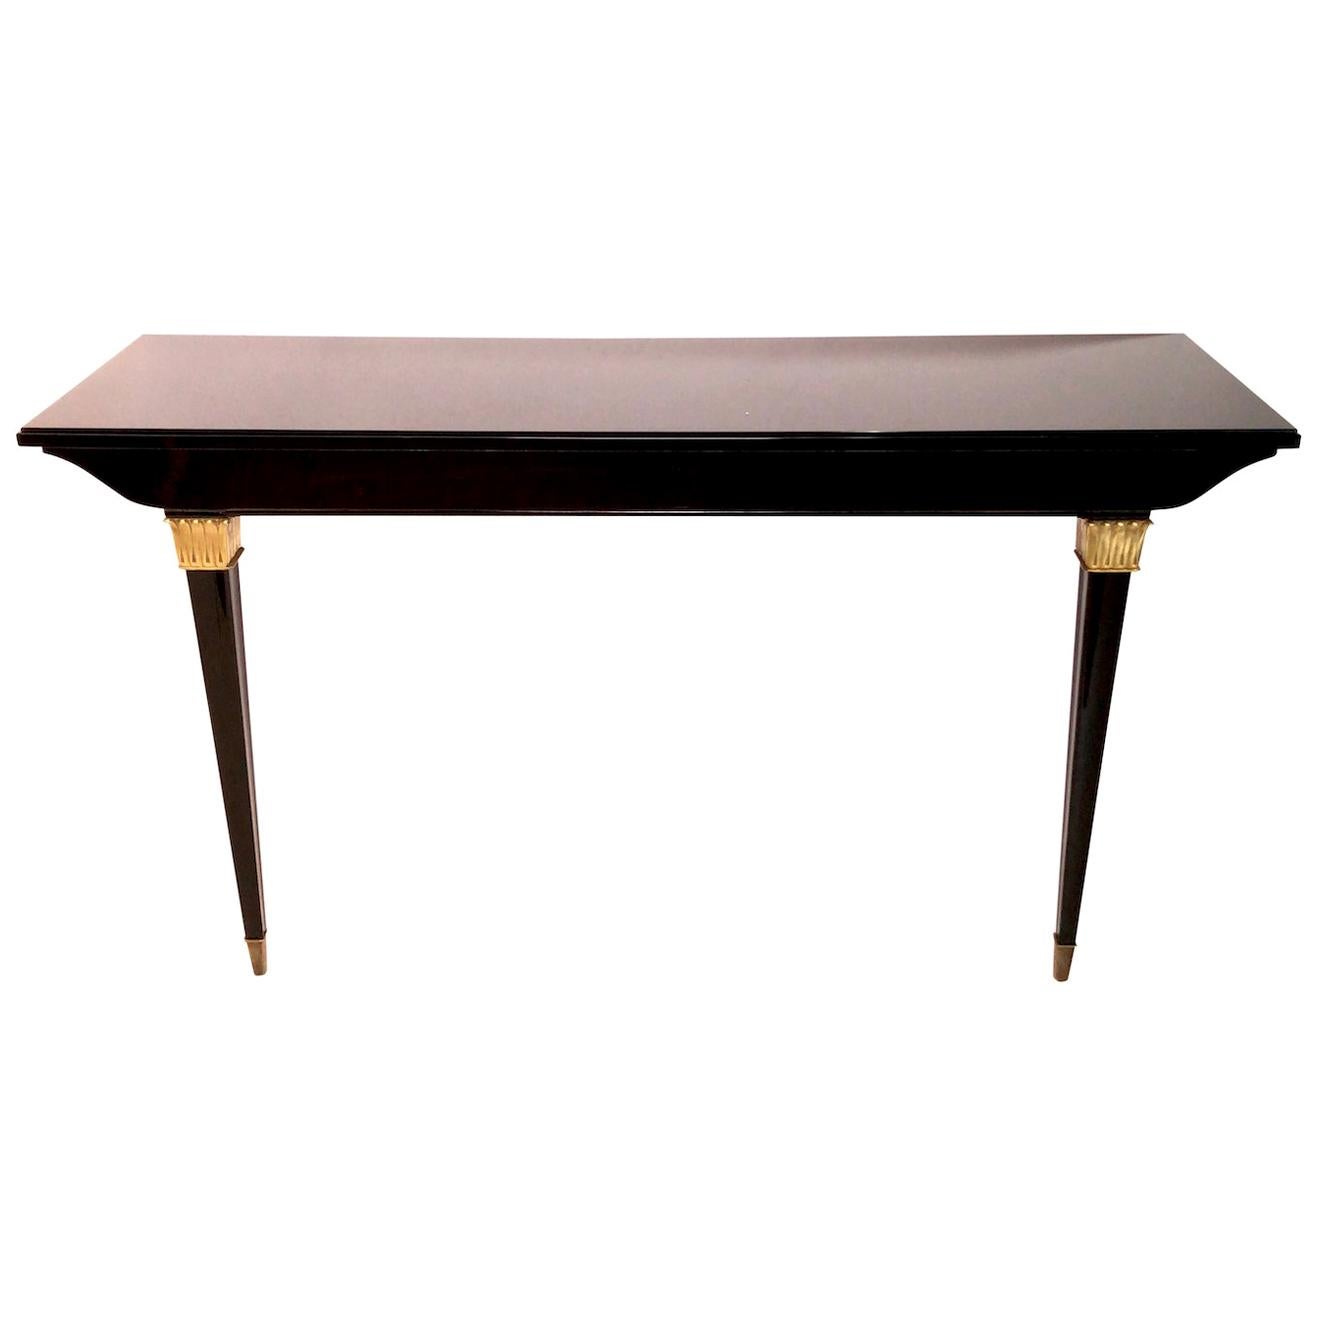 Black Art Deco Console Table Two Thin Feed Metal Sabots and Golden Applications For Sale